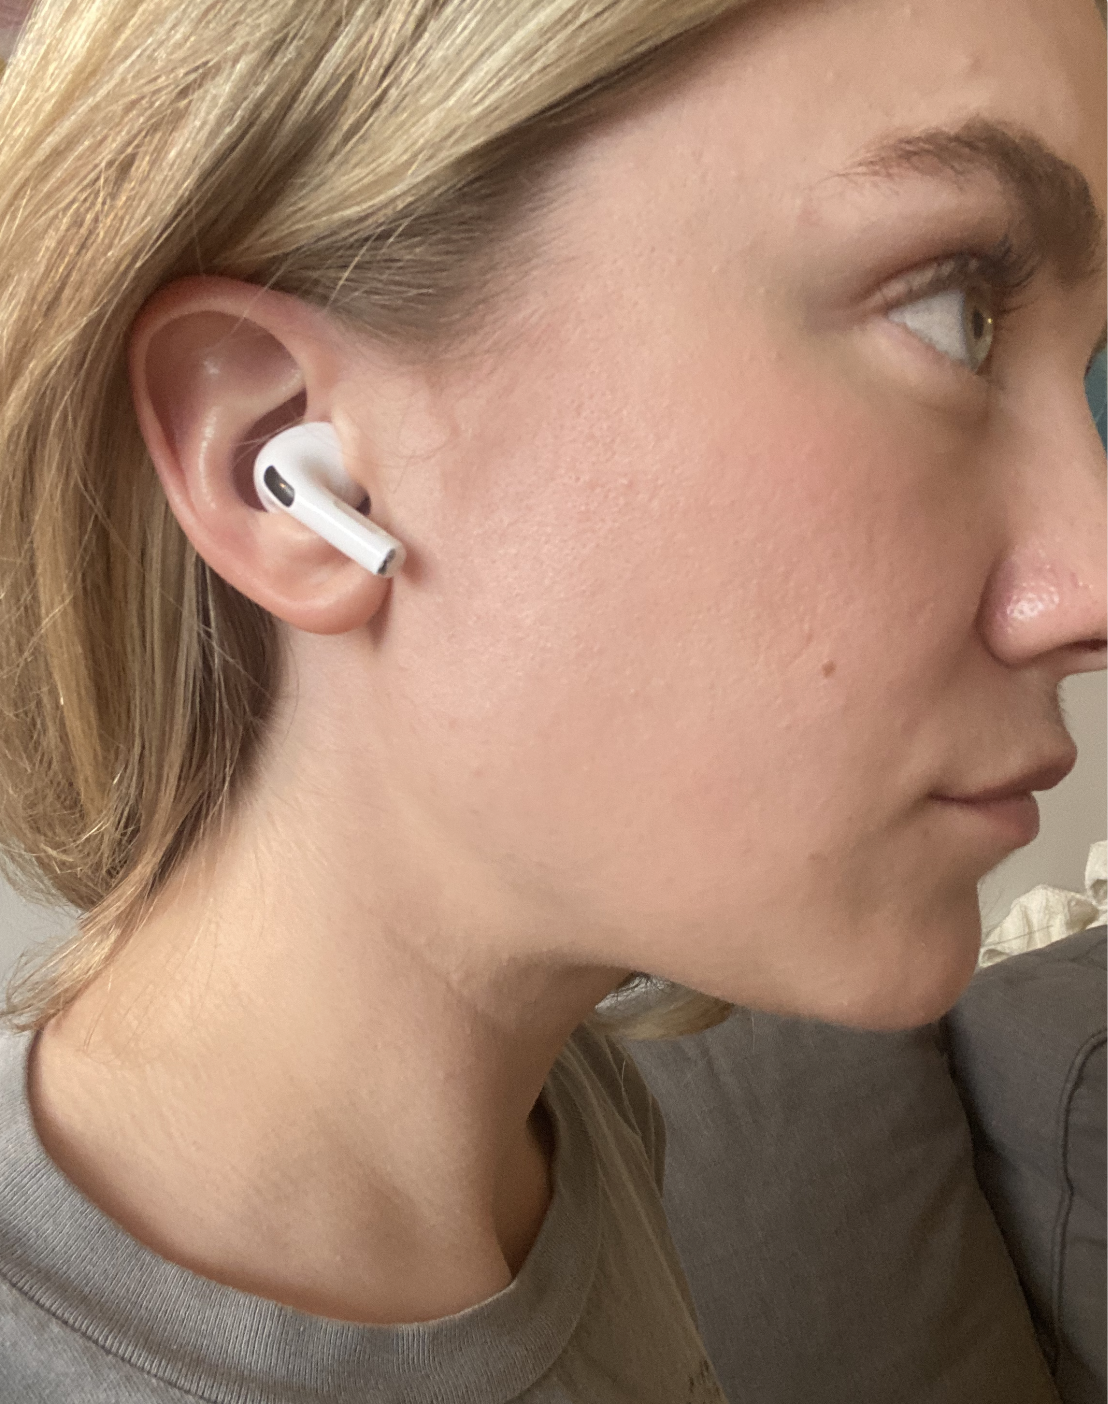 BuzzFeed editor wearing AirPods Pro